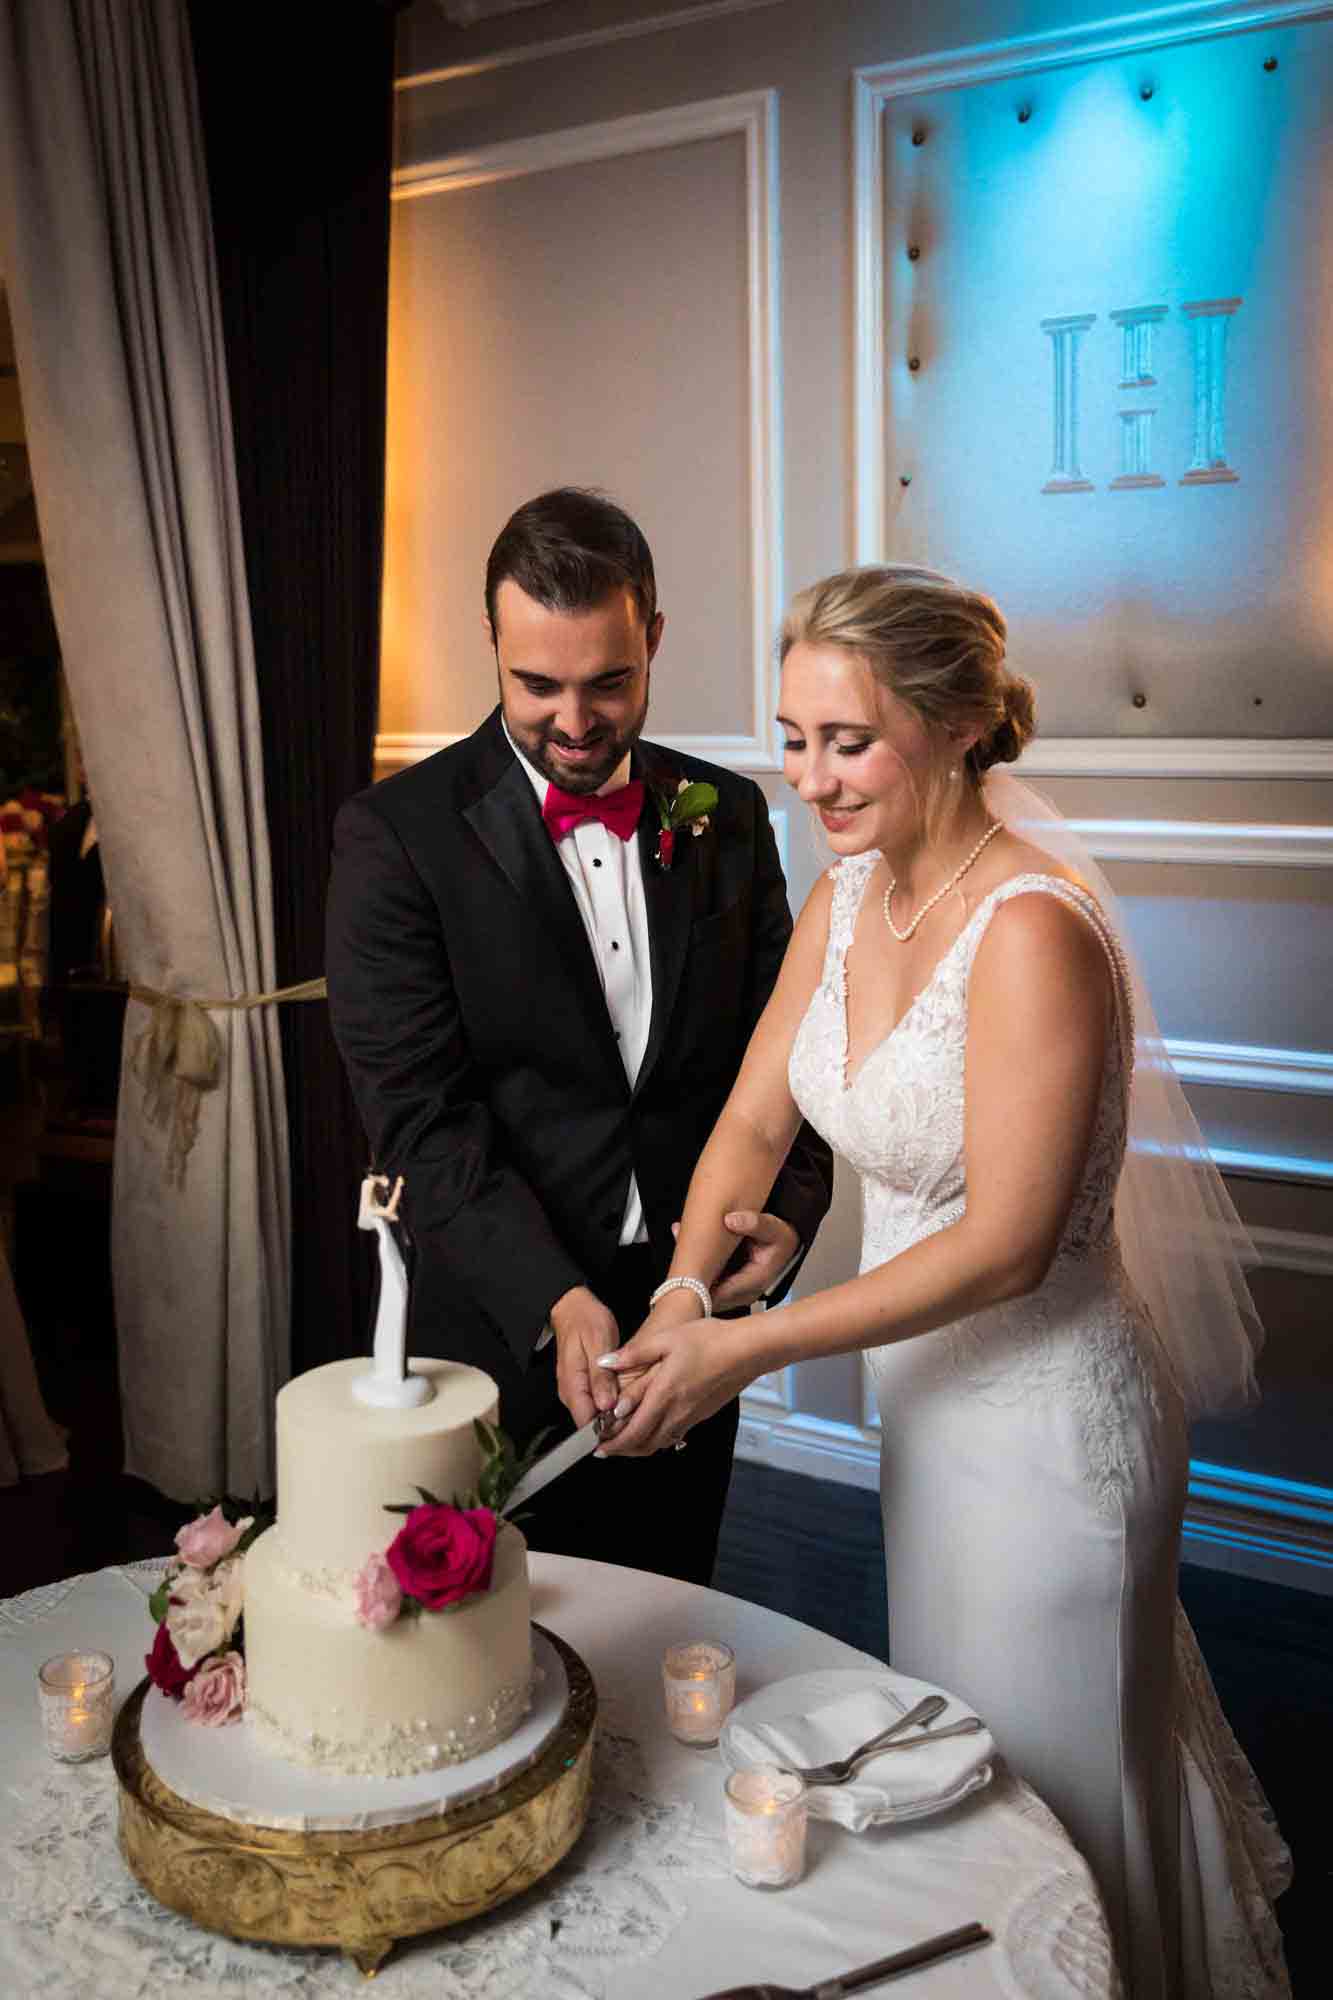 Bride and groom cutting cake at a Briarcliff Manor wedding